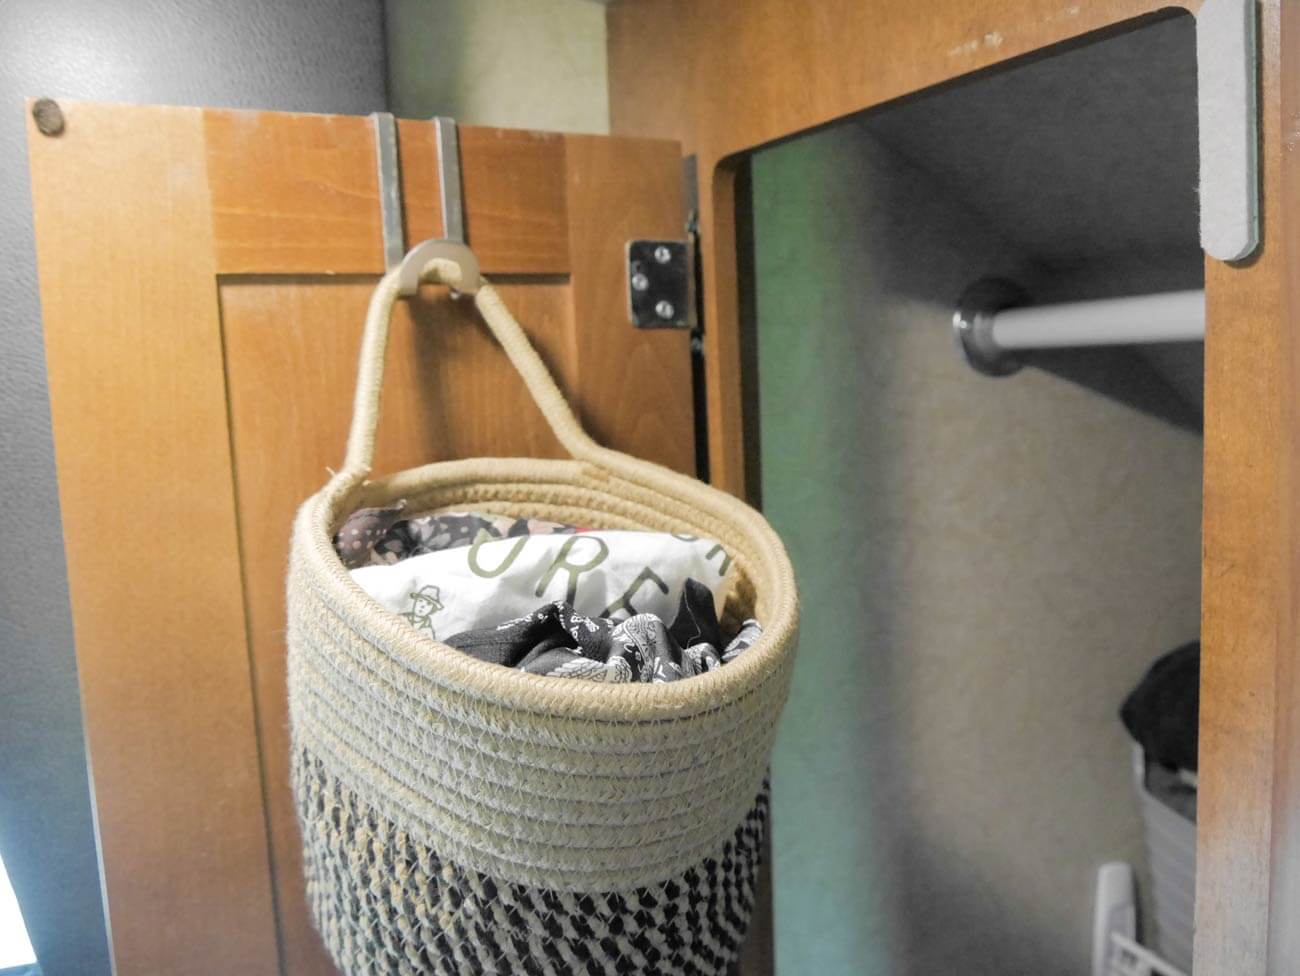 small basket with clothing items hanging from hook on rv closet door